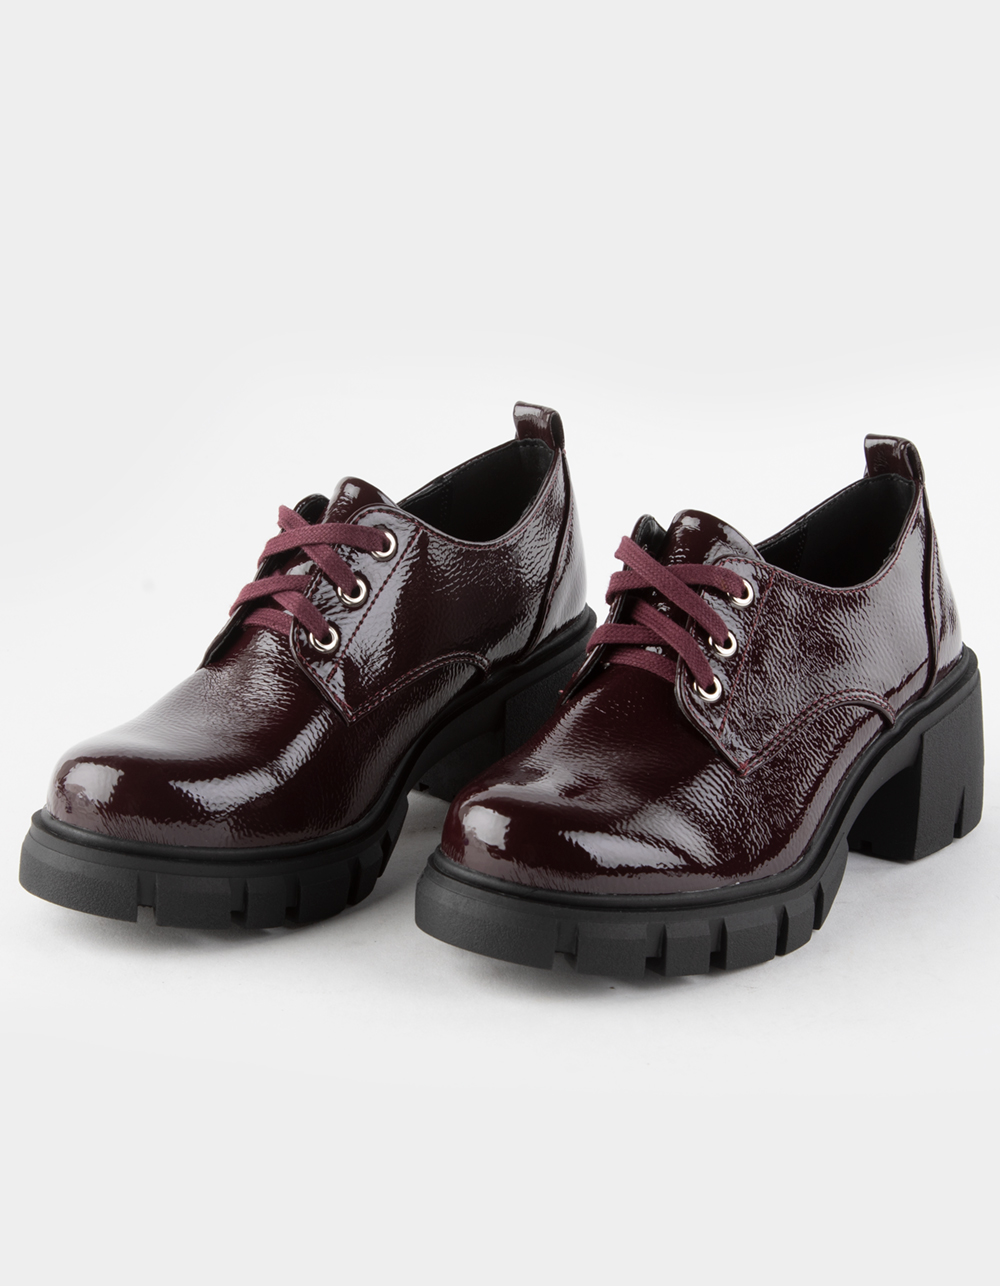 Black Burgundy Lace Up Glossy Patent Leather Loafers Flats Dress